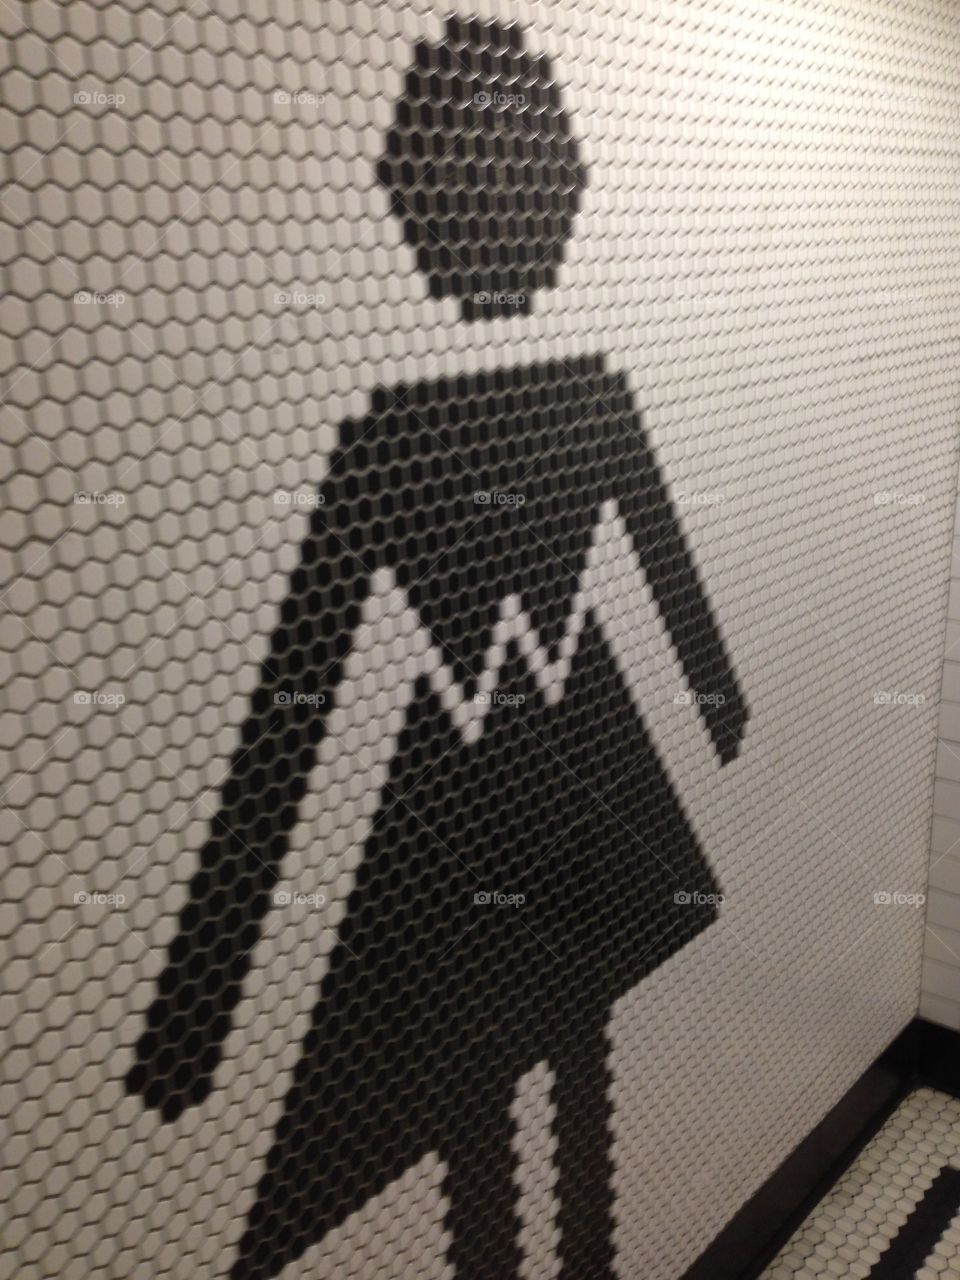 This restroom is for pointy-titted bra-less women